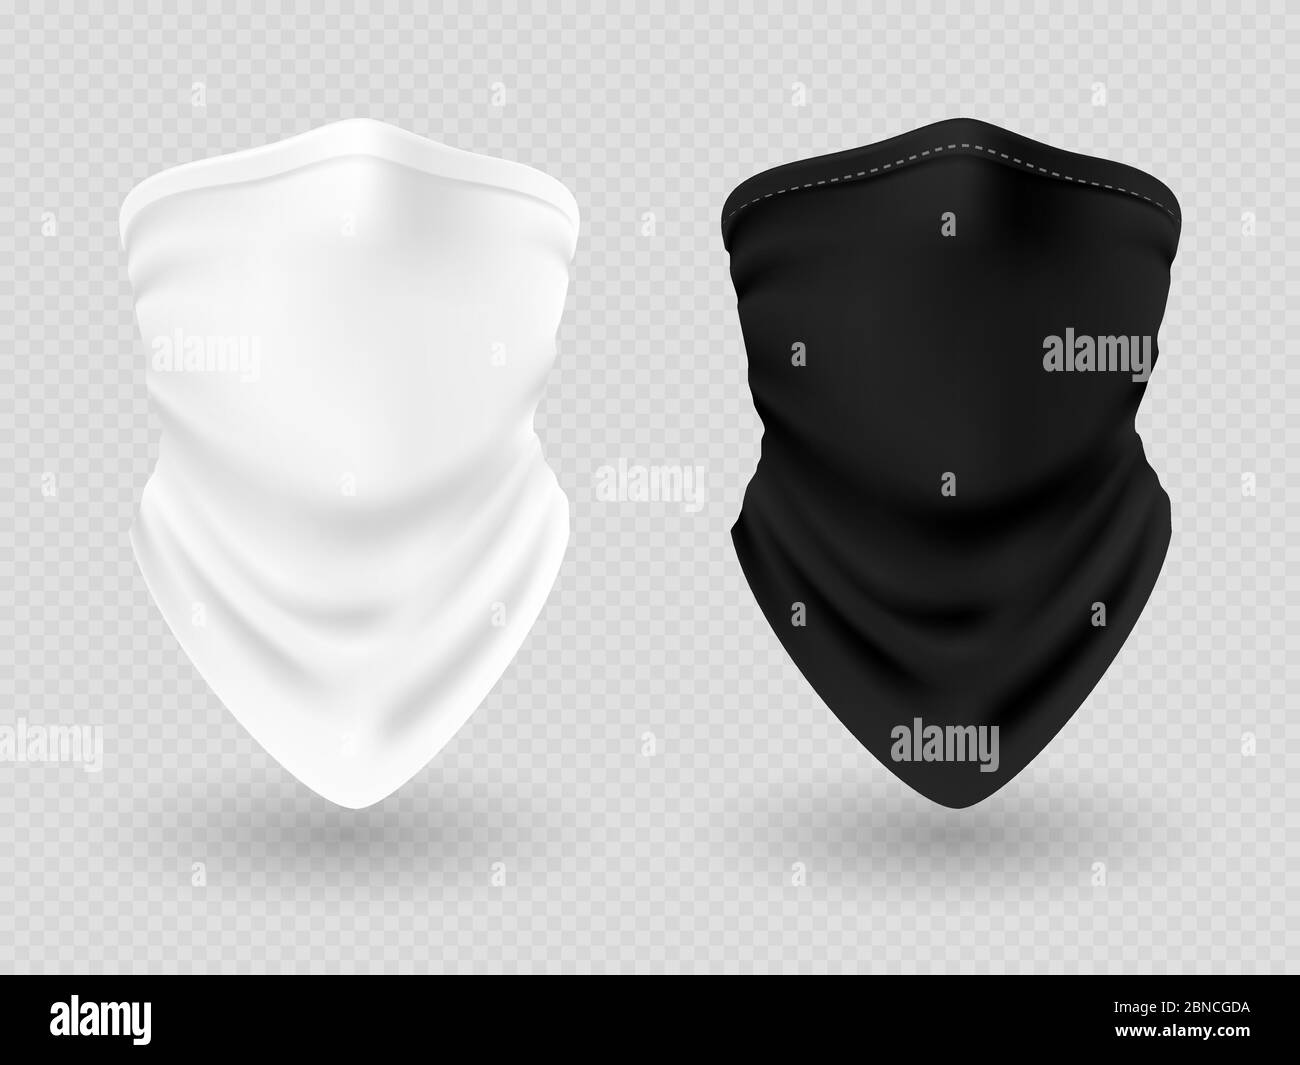 Realistic face bandanas or biker scarfs black and white isolated on transparent background illustration Stock Vector